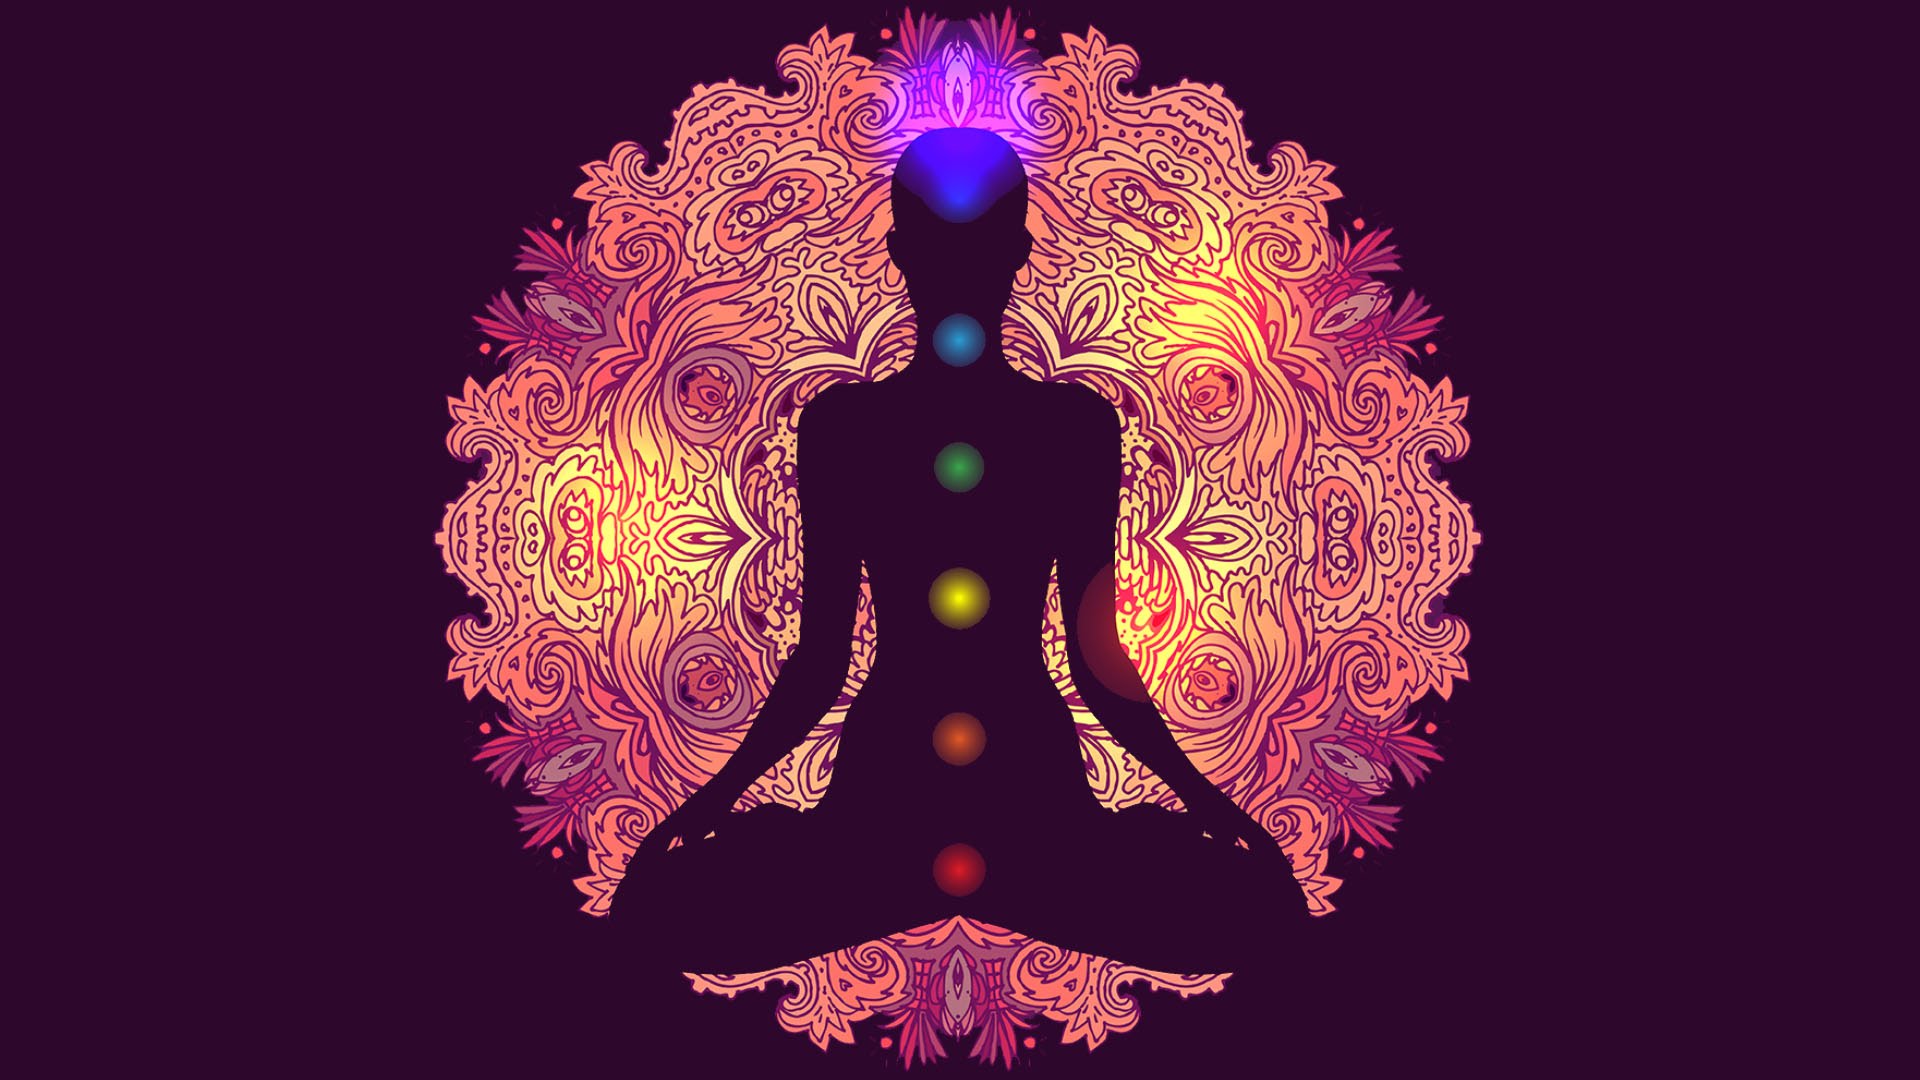 What are the uses of chakras in Buddhism? 3